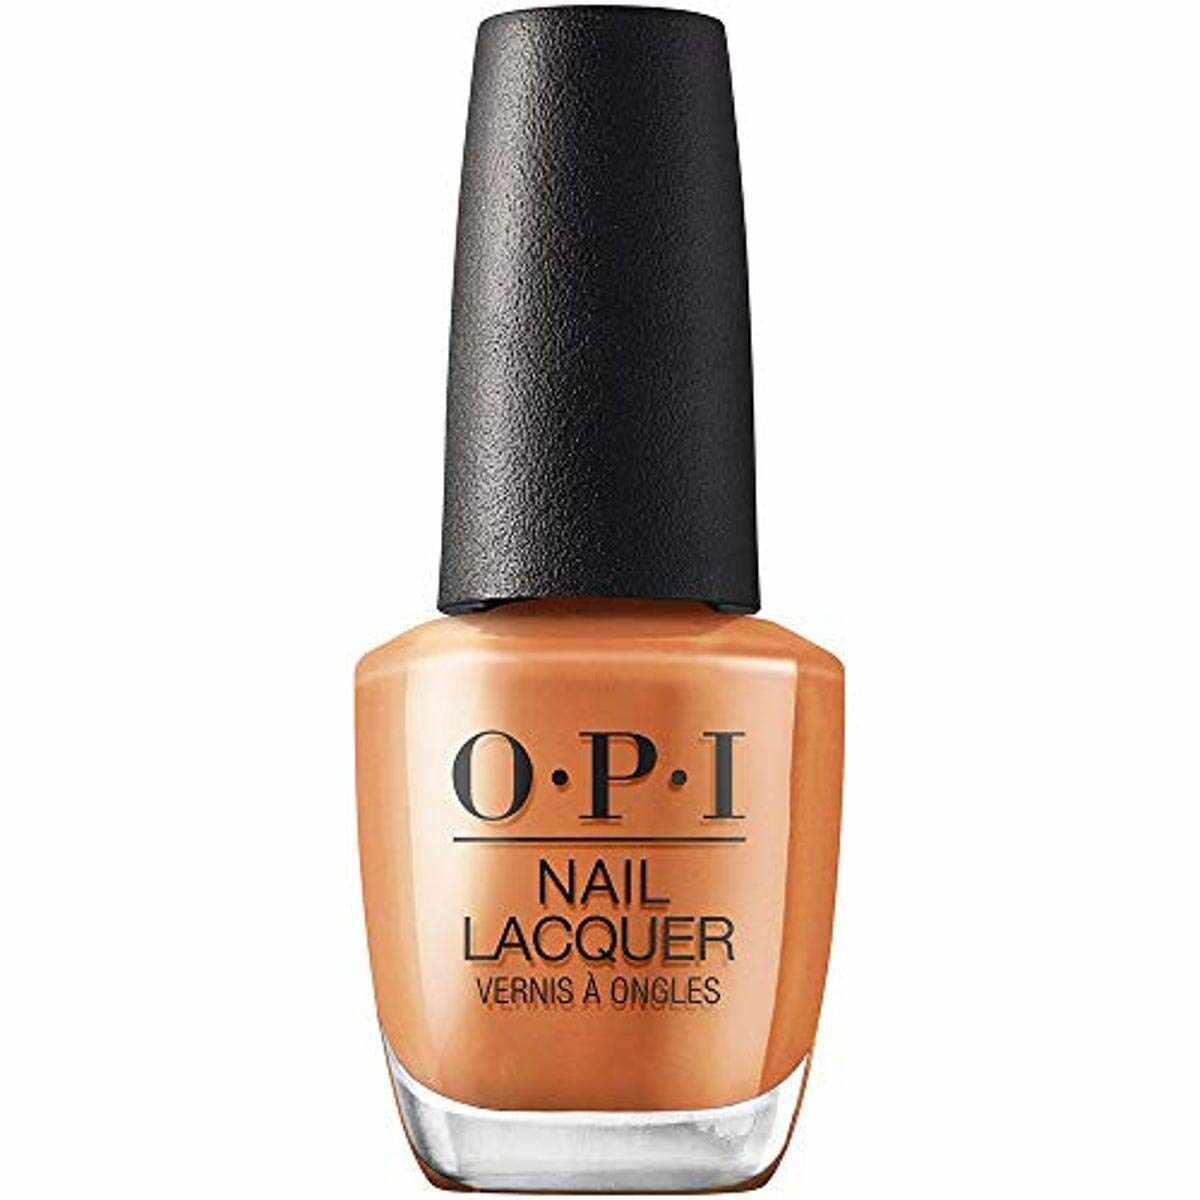 Lac de unghii OPI Nail Lacquer Have Your Panettone And Eat It Too, NL MI02, 15ml